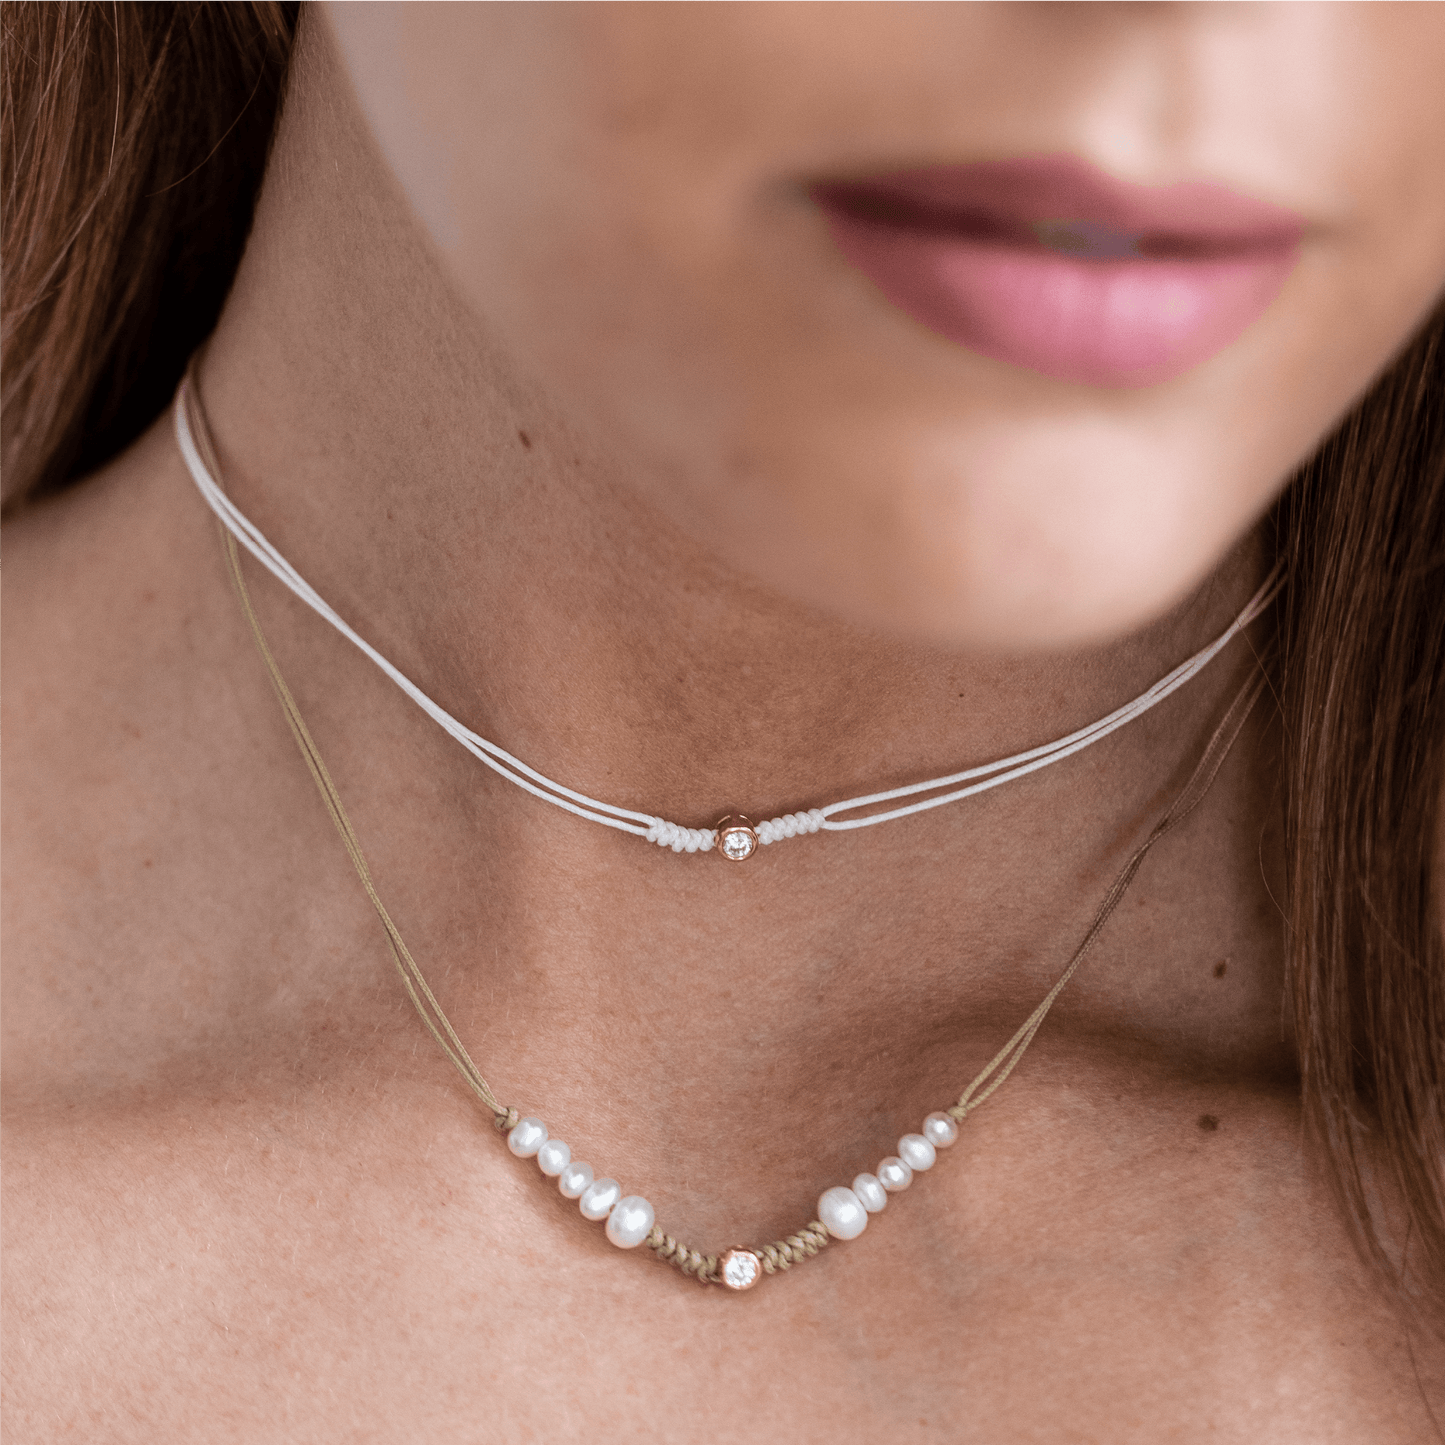 Ten Natural Pearl String of Love Necklace - 14K White Gold Necklaces 14K Solid Gold 